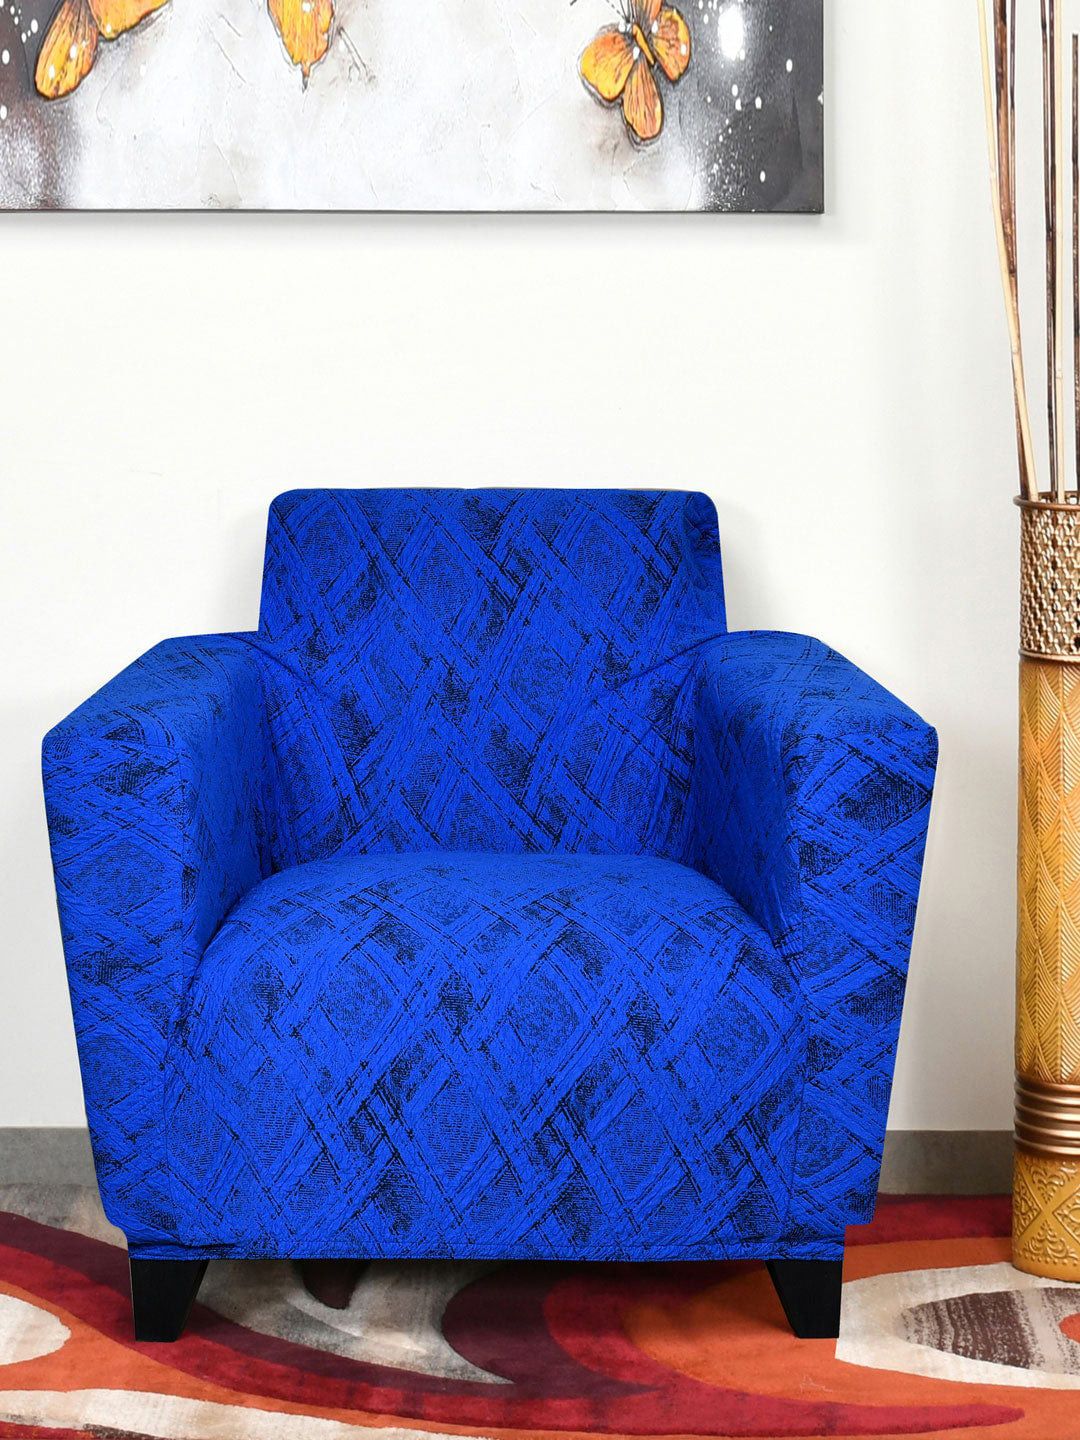 Athome by Nilkamal Blue 1 Seater Jacquard Knit Sofa Cover Price in India